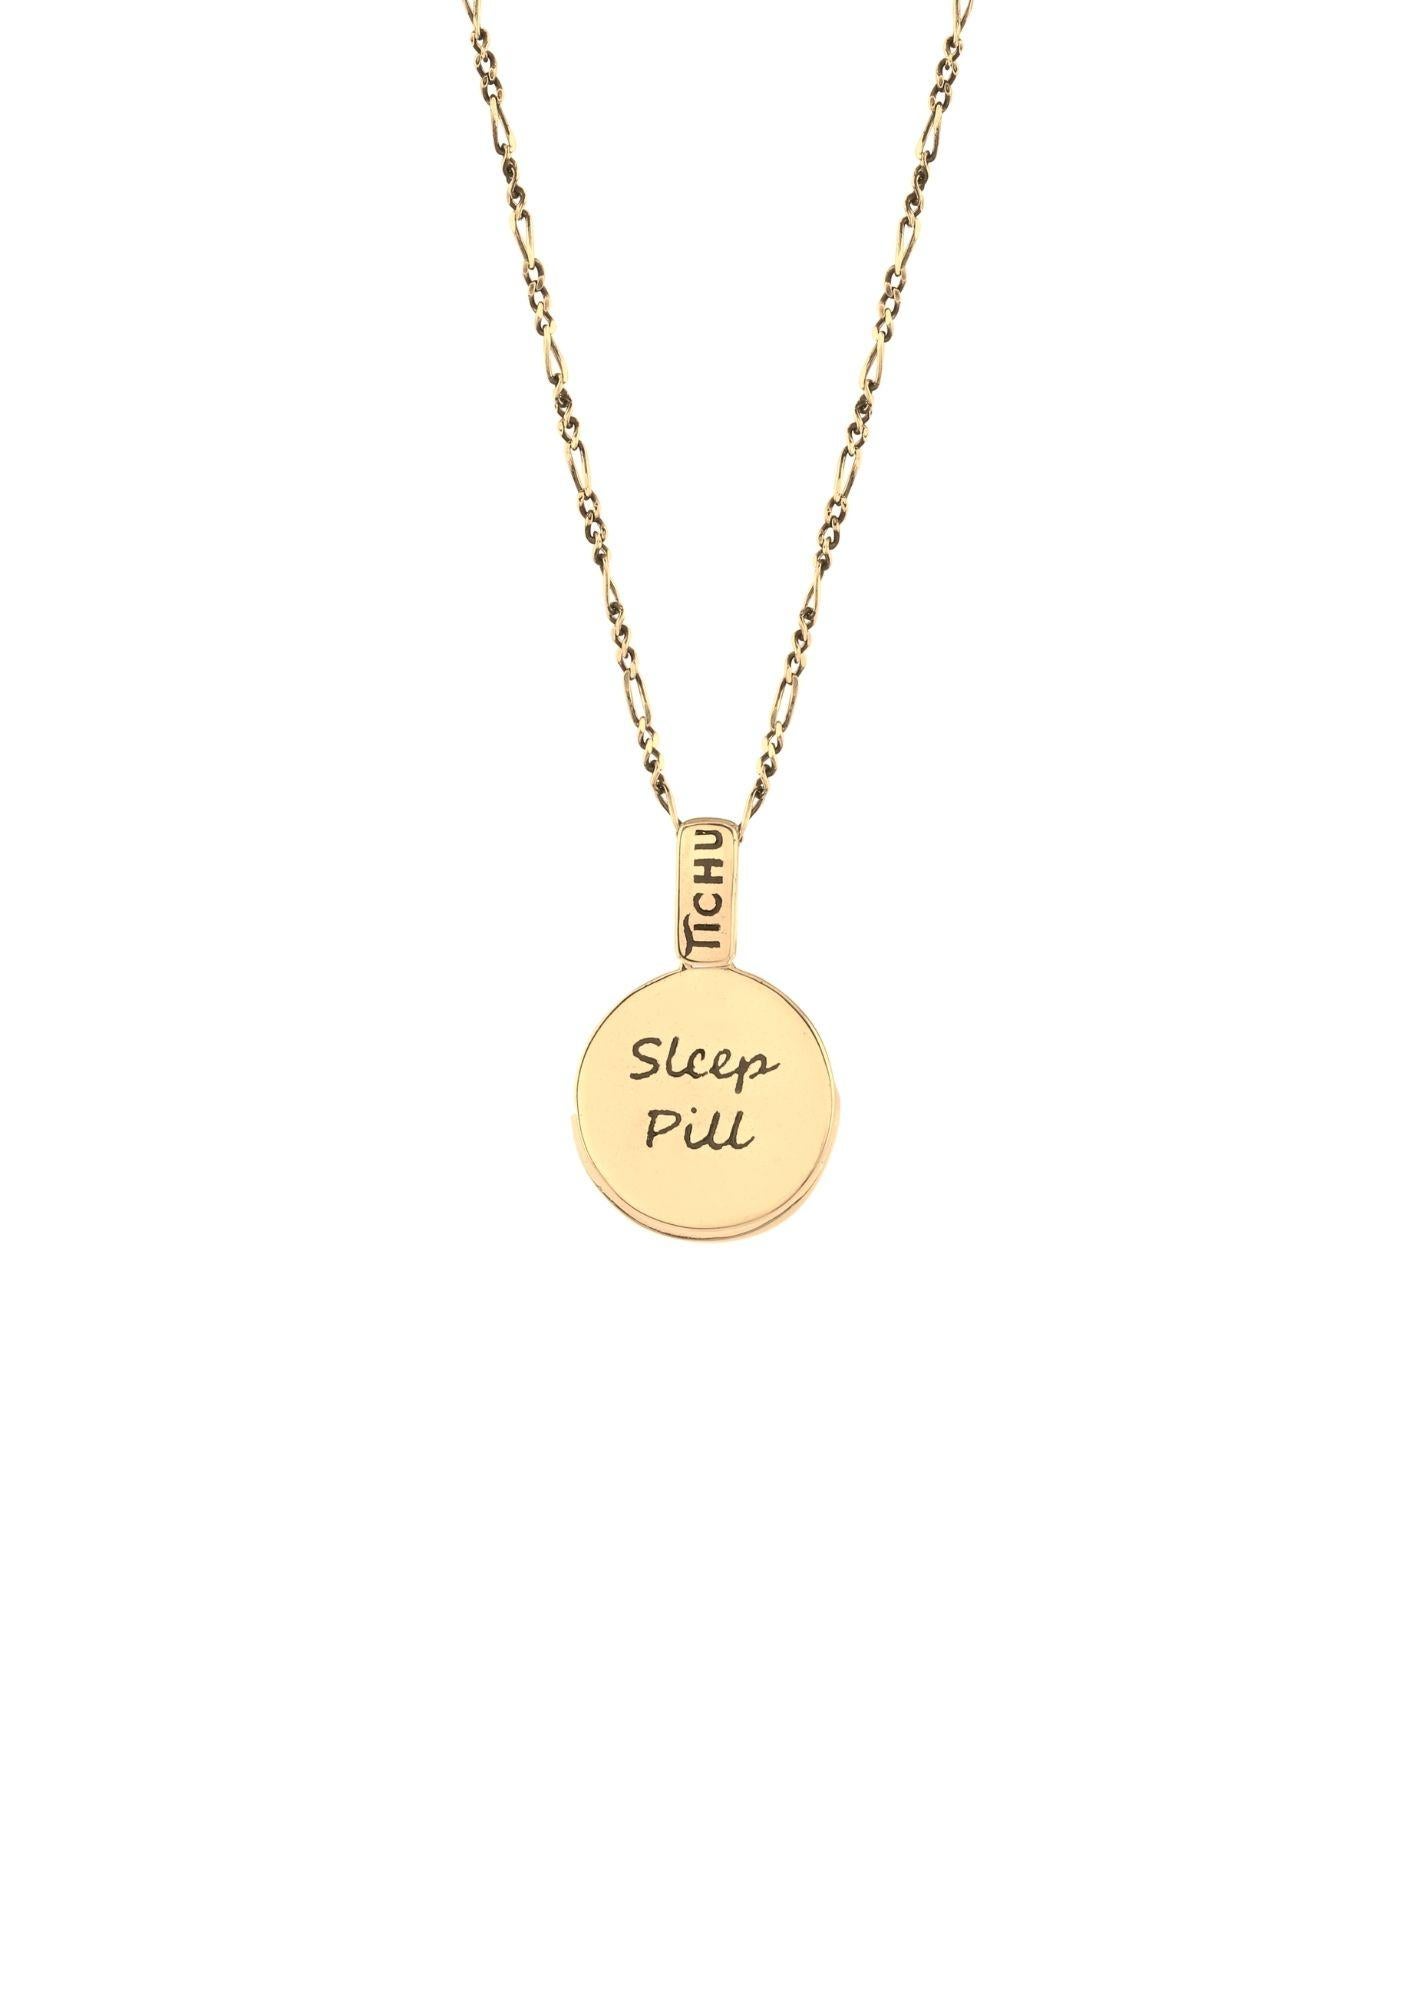 A wholesome sleep cycle is significant for a calmer and balanced mind. The crystal brings you one step closer to peace by clearing away the unconstructive thoughts within your mind.

Each Sleep Pill Pendant is handcrafted in Sterling Silver,